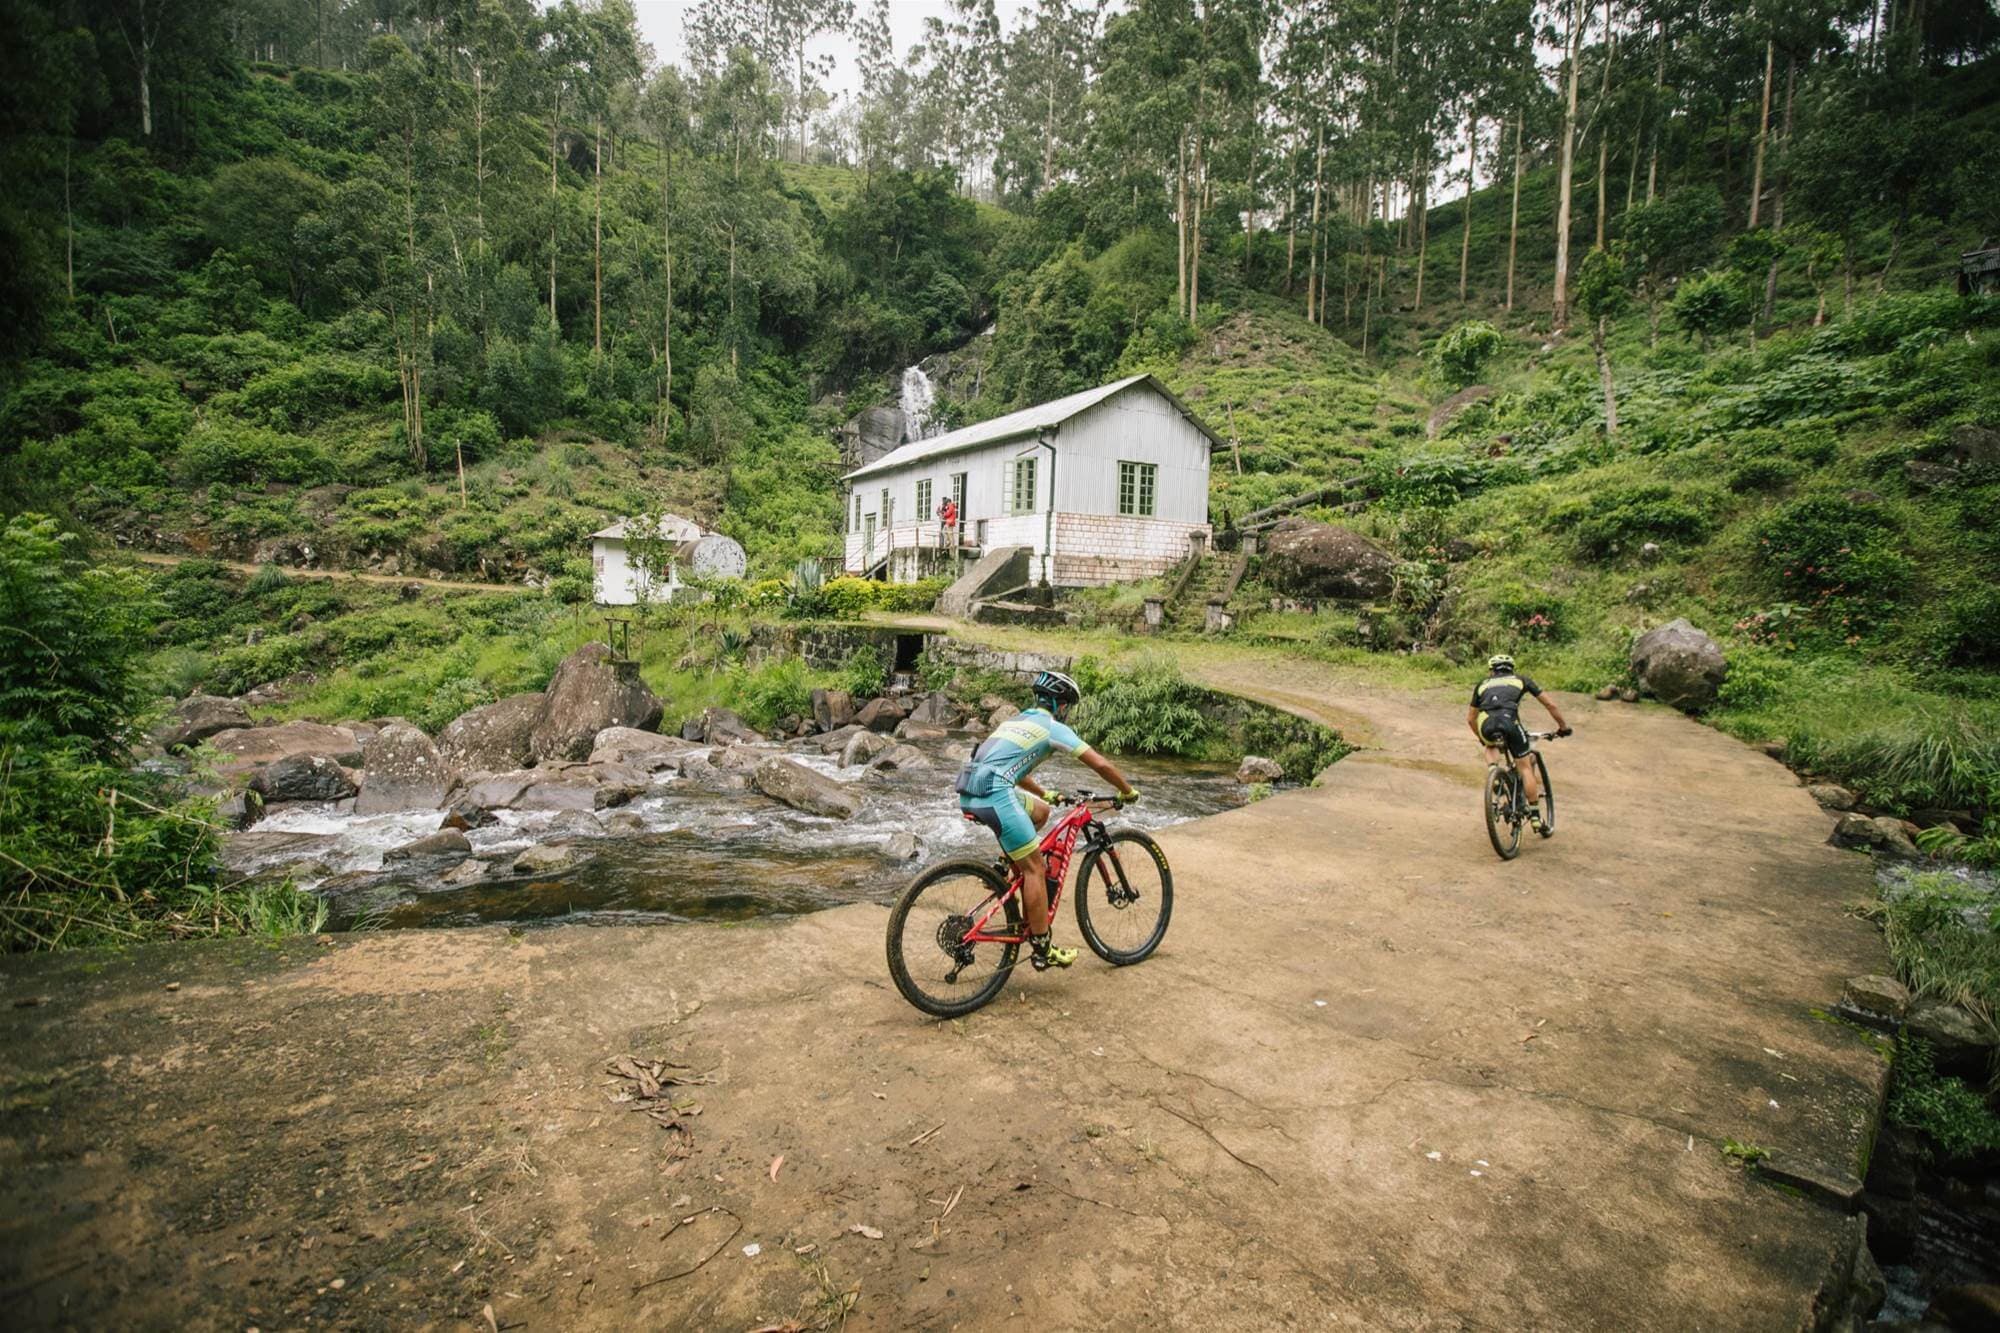 The cyclists get experience with stunning landscapes in Cycling tour Nuwara Eliya Sri Lanka